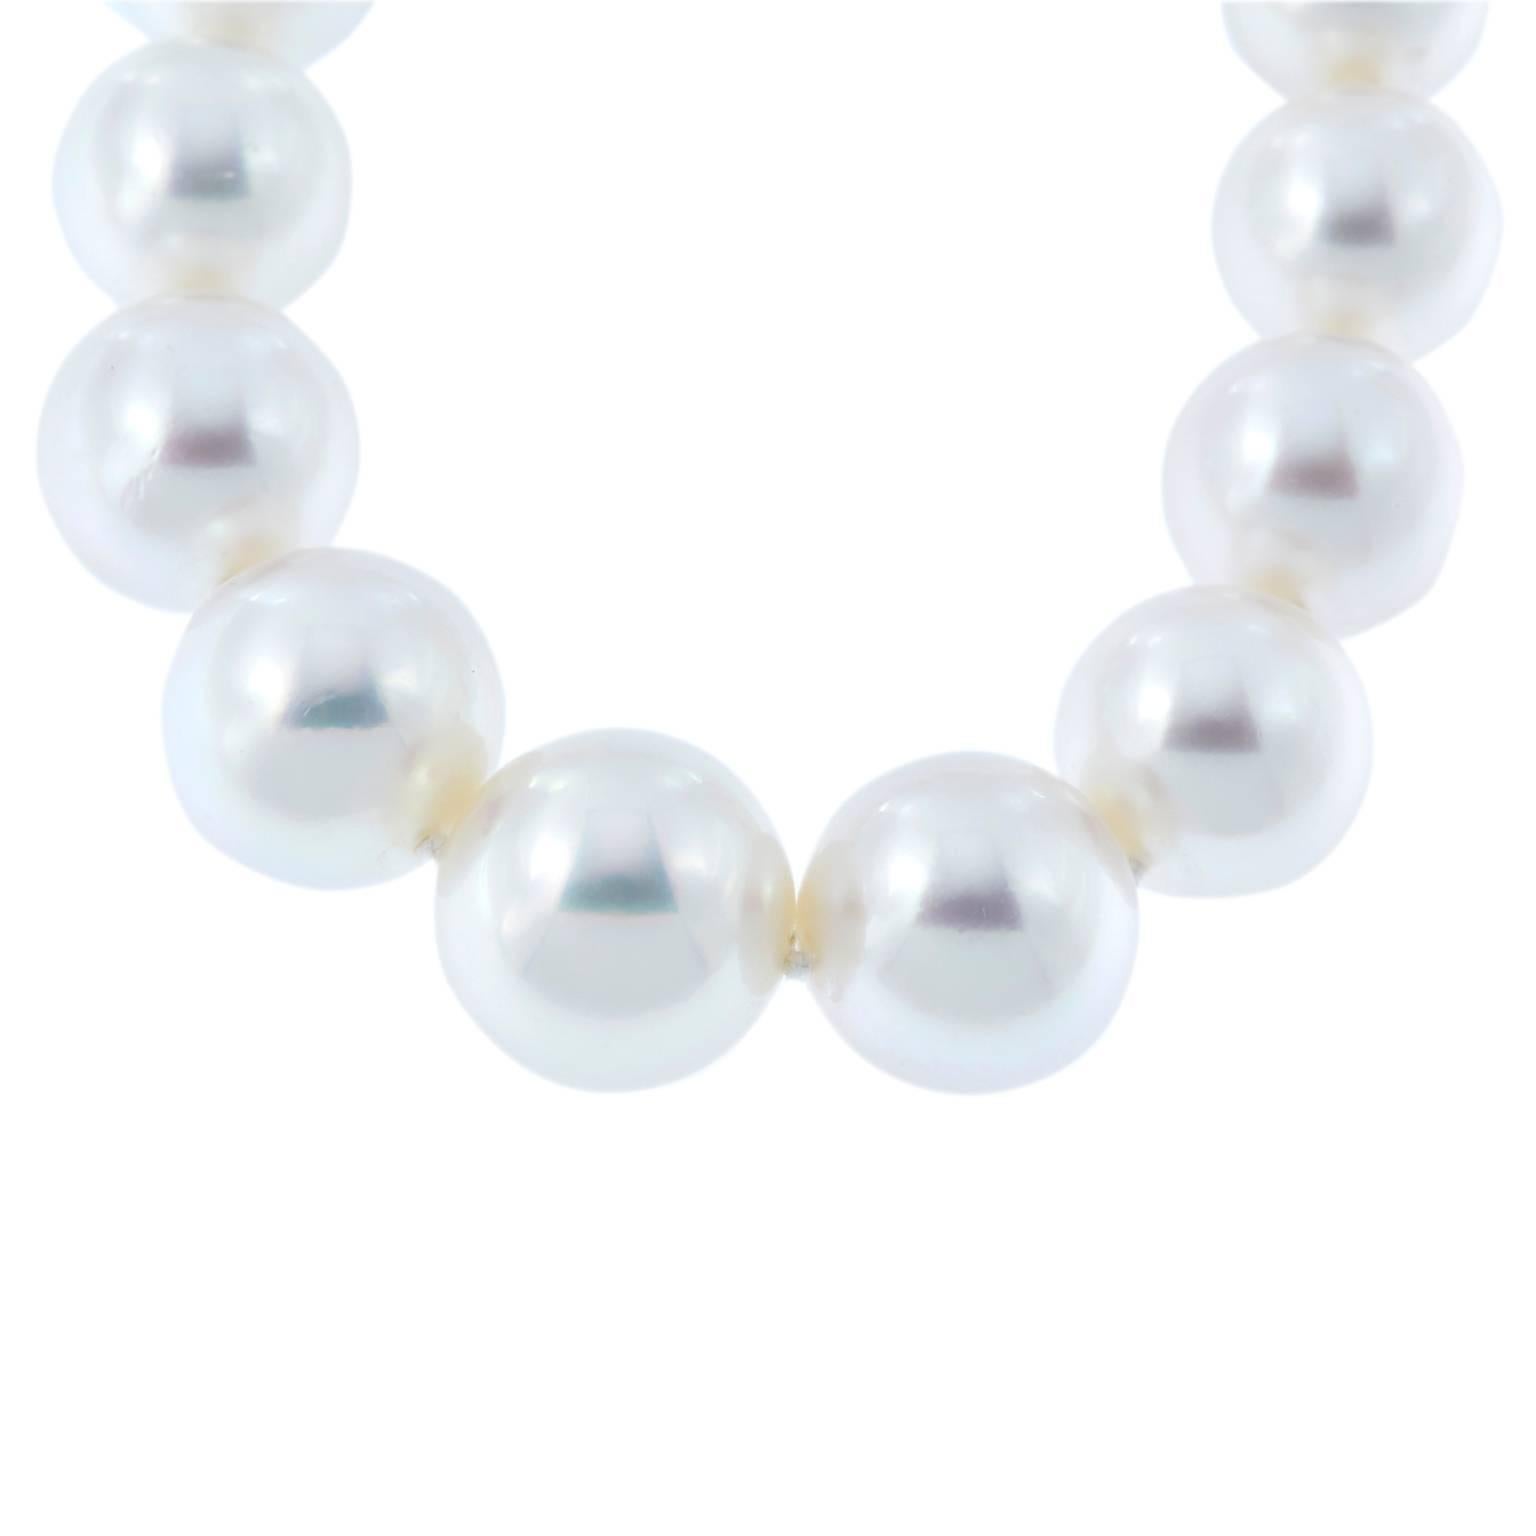 The gift of a lifetime - elegant pearls are a timeless tradition. Necklace is comprised of 35 pearls,11-15 mm. Clasp is 18k white gold. Weighs 91.8 grams. 18 in Long.